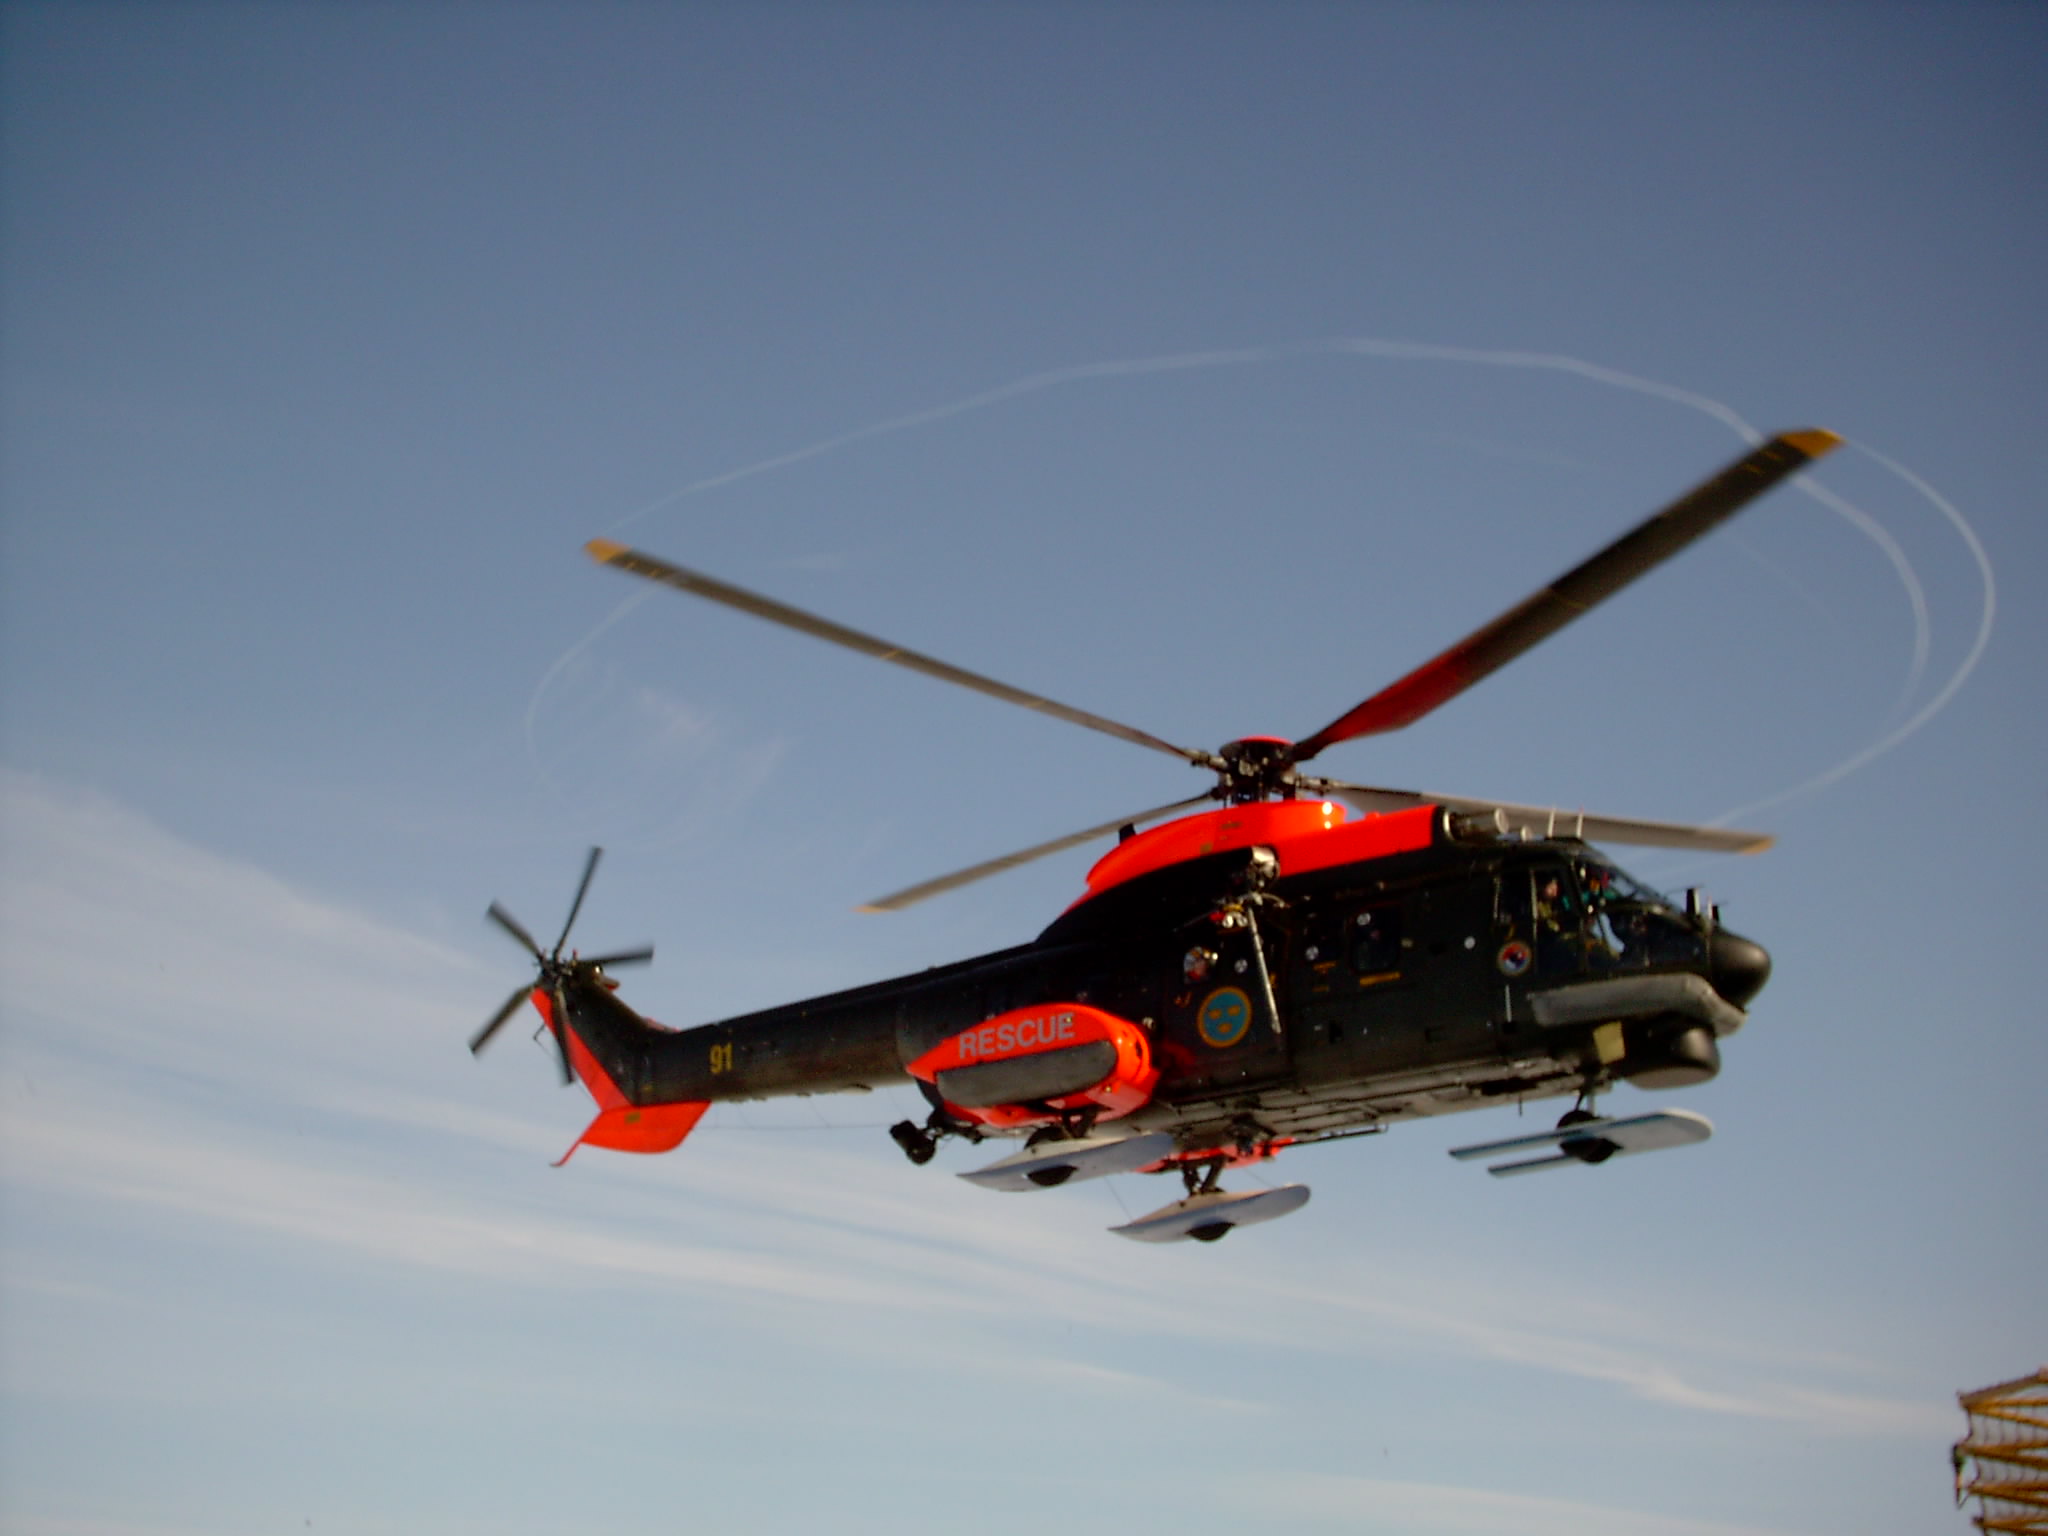 Airbus signs to work on MK1 helicopters Romania